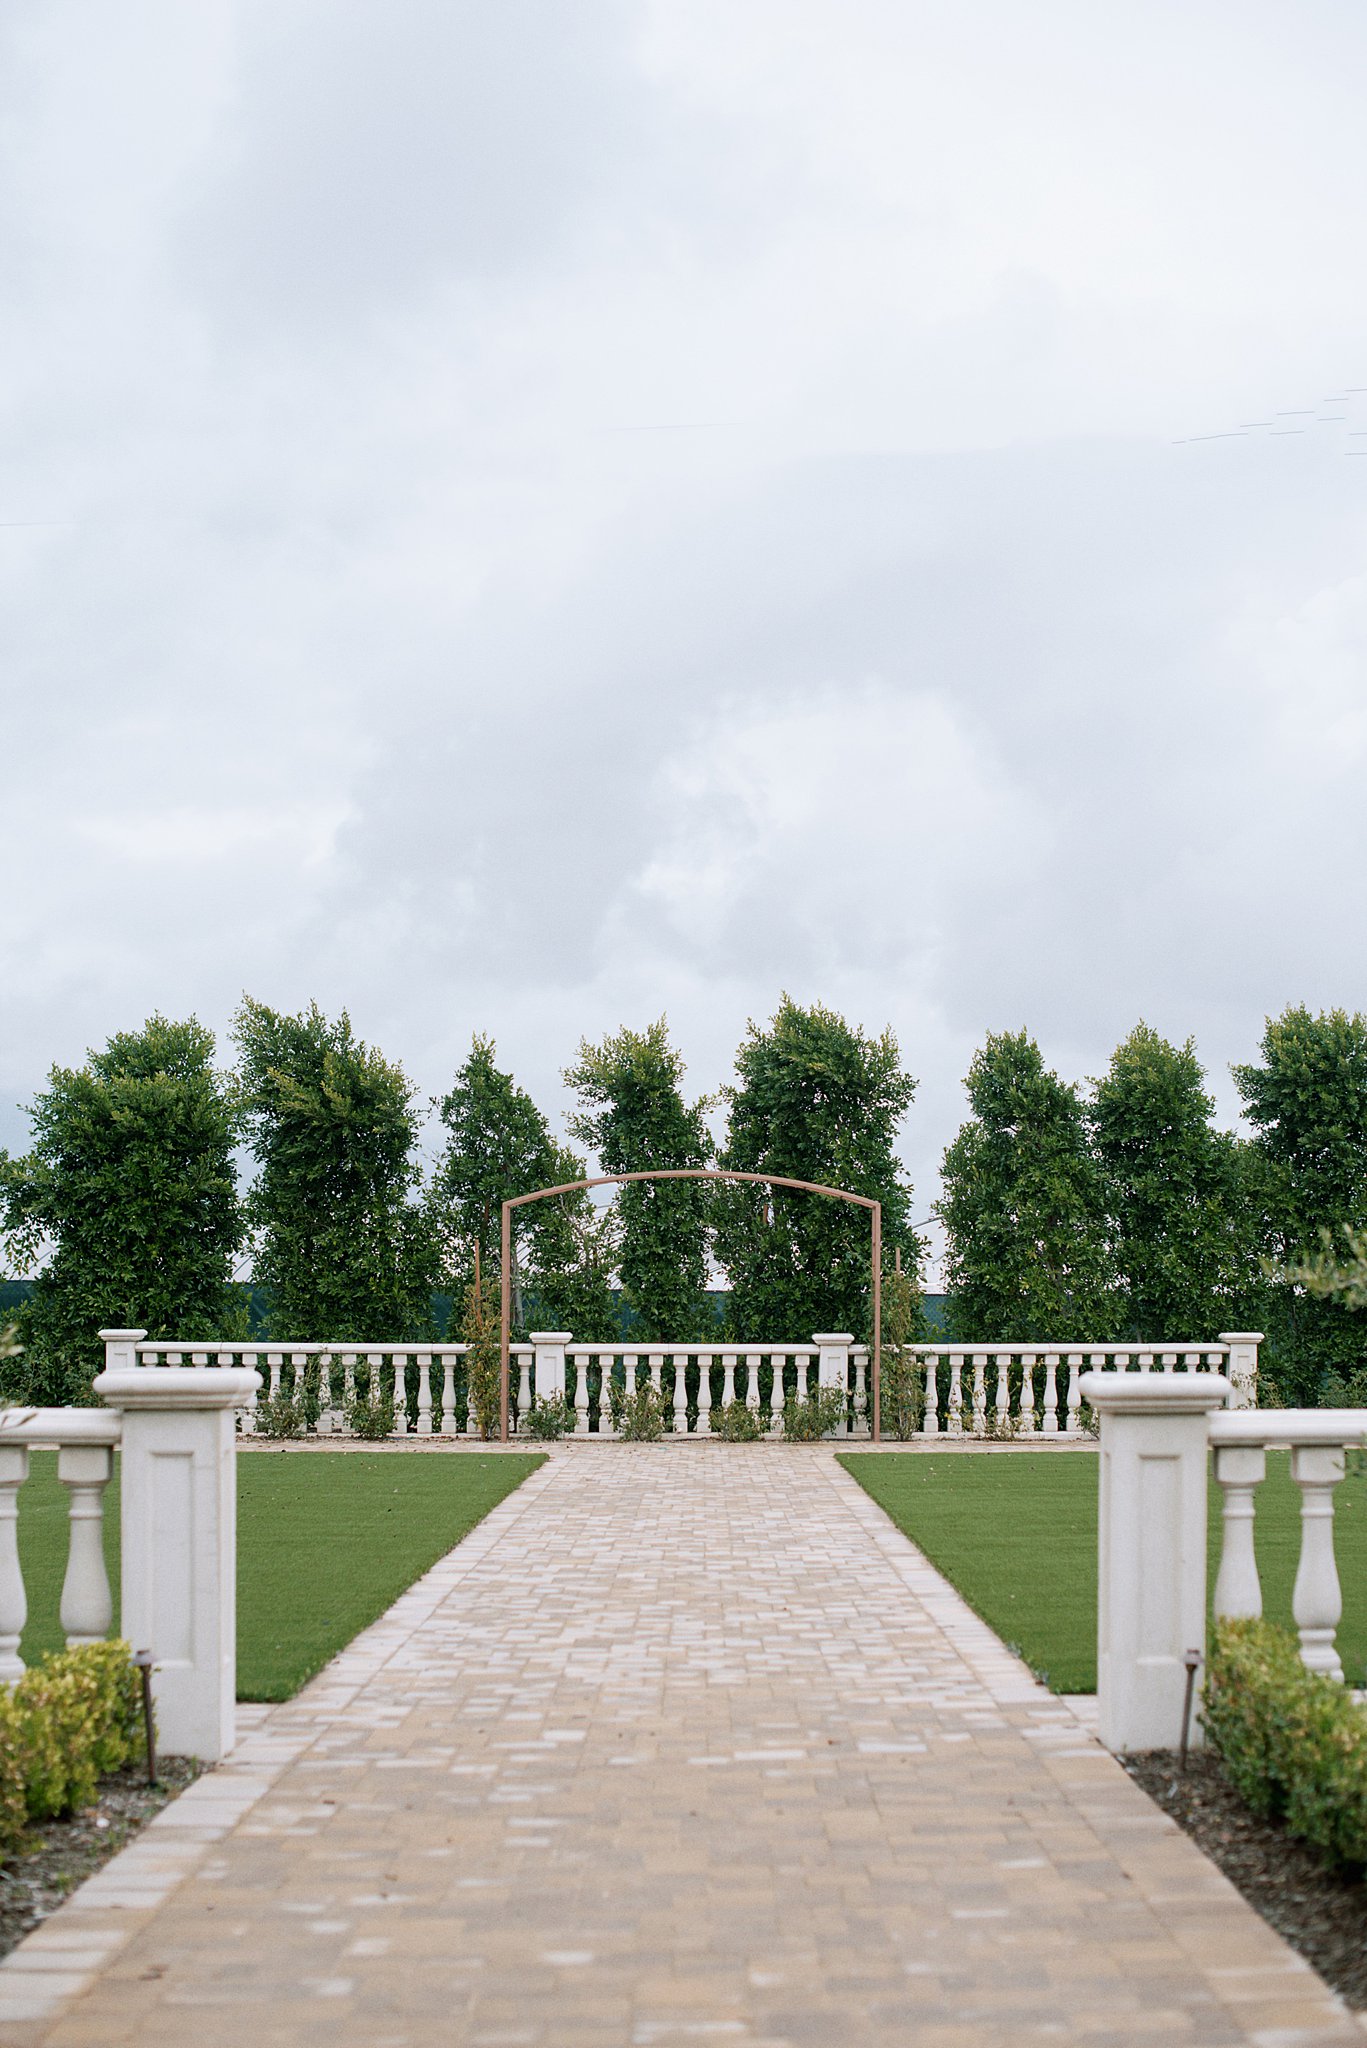 Ceremony site at Tuscan Rose Ranch featuring low columns and an aisle made of stone pavers.